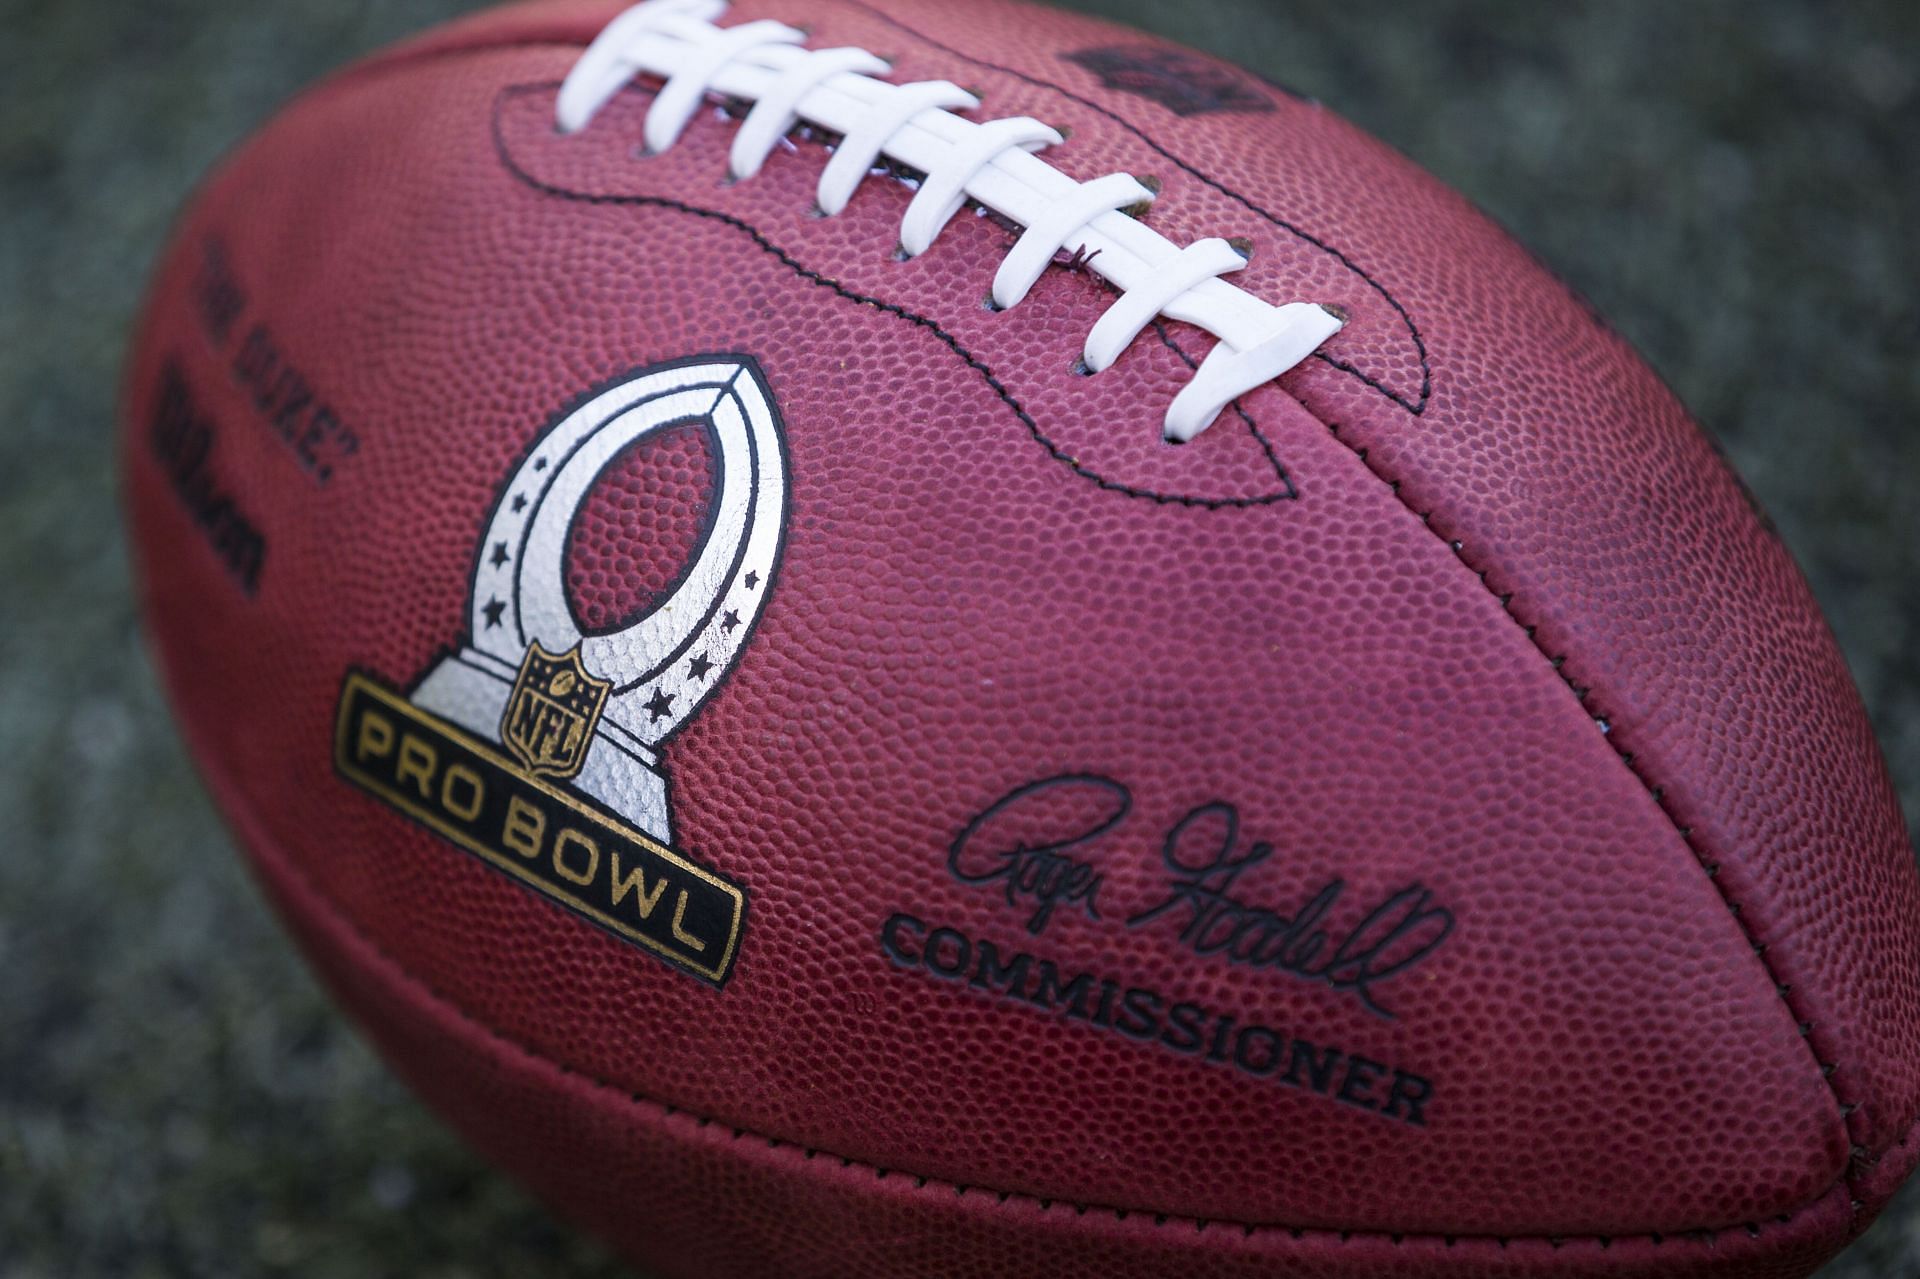 The Pro Bowl game ball seen prior to the 2016 edition (Photo: Getty)